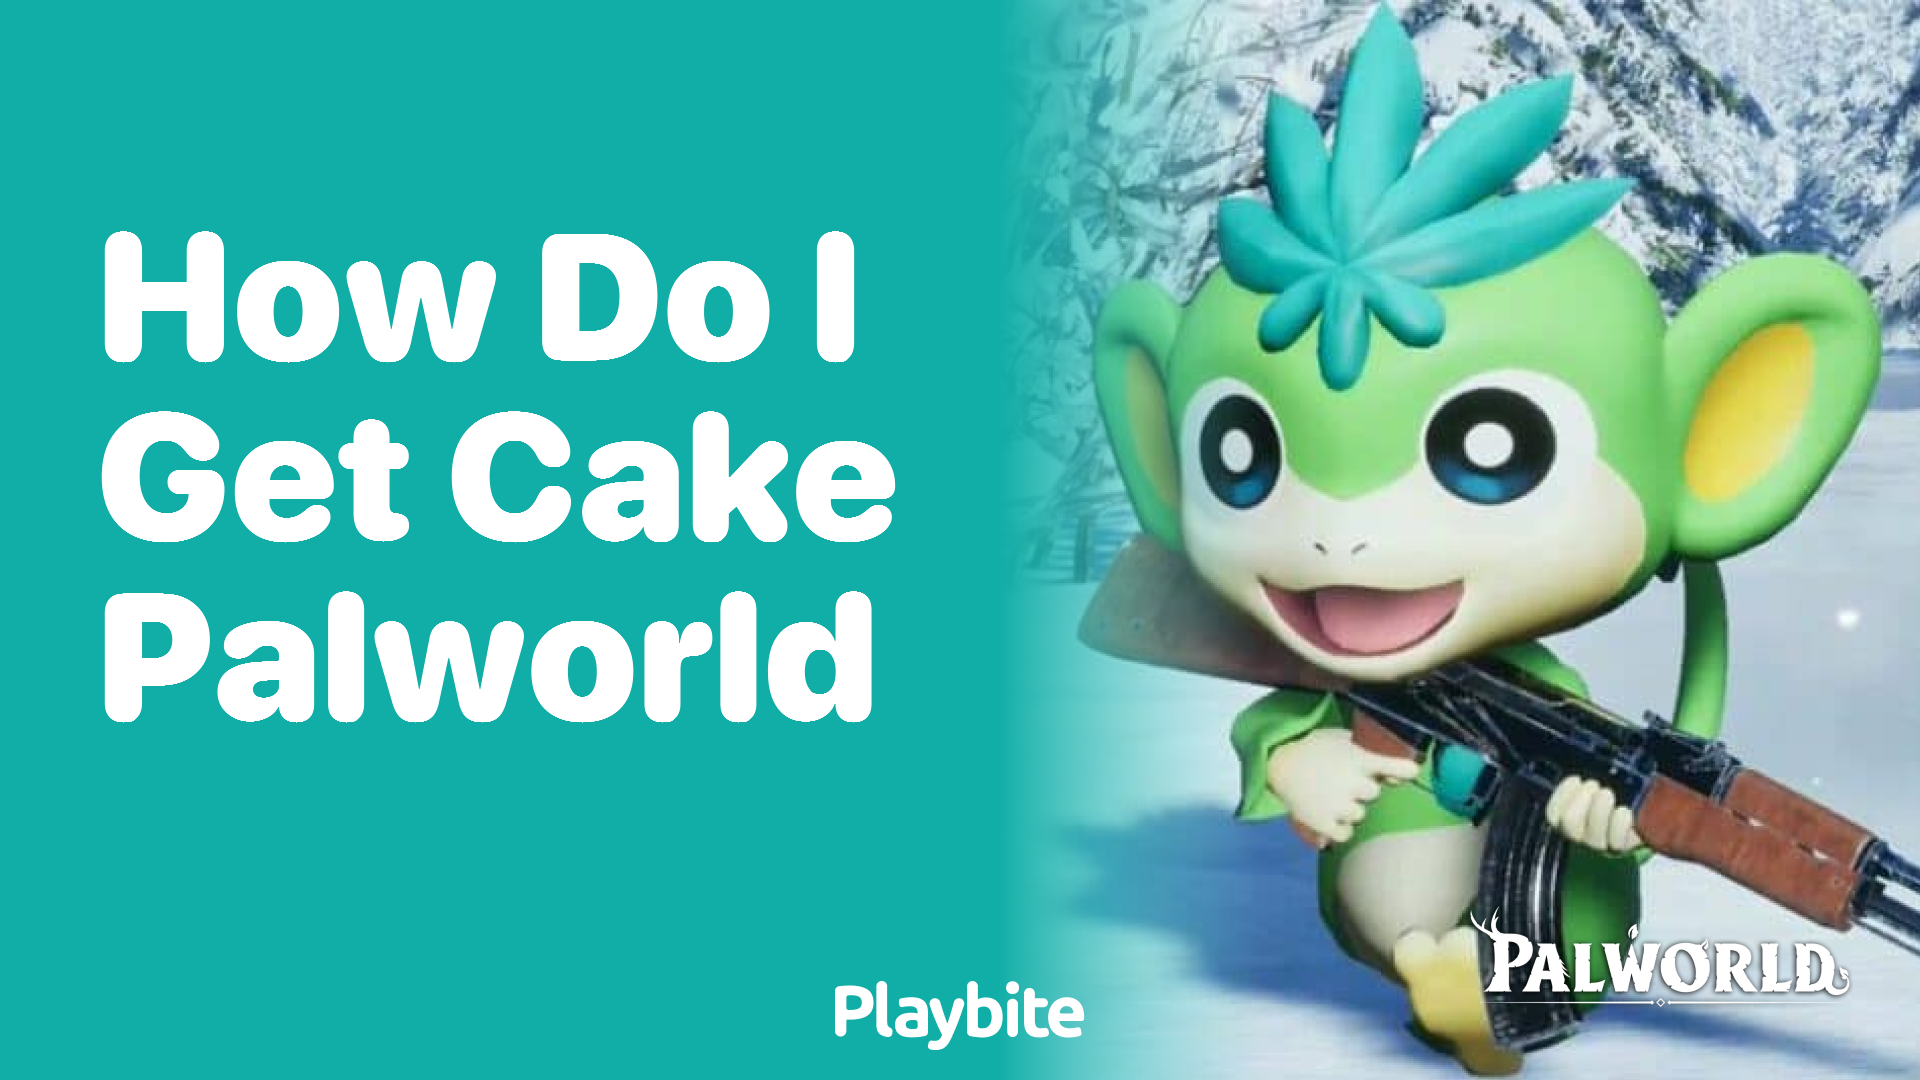 How do I get cake in Palworld?